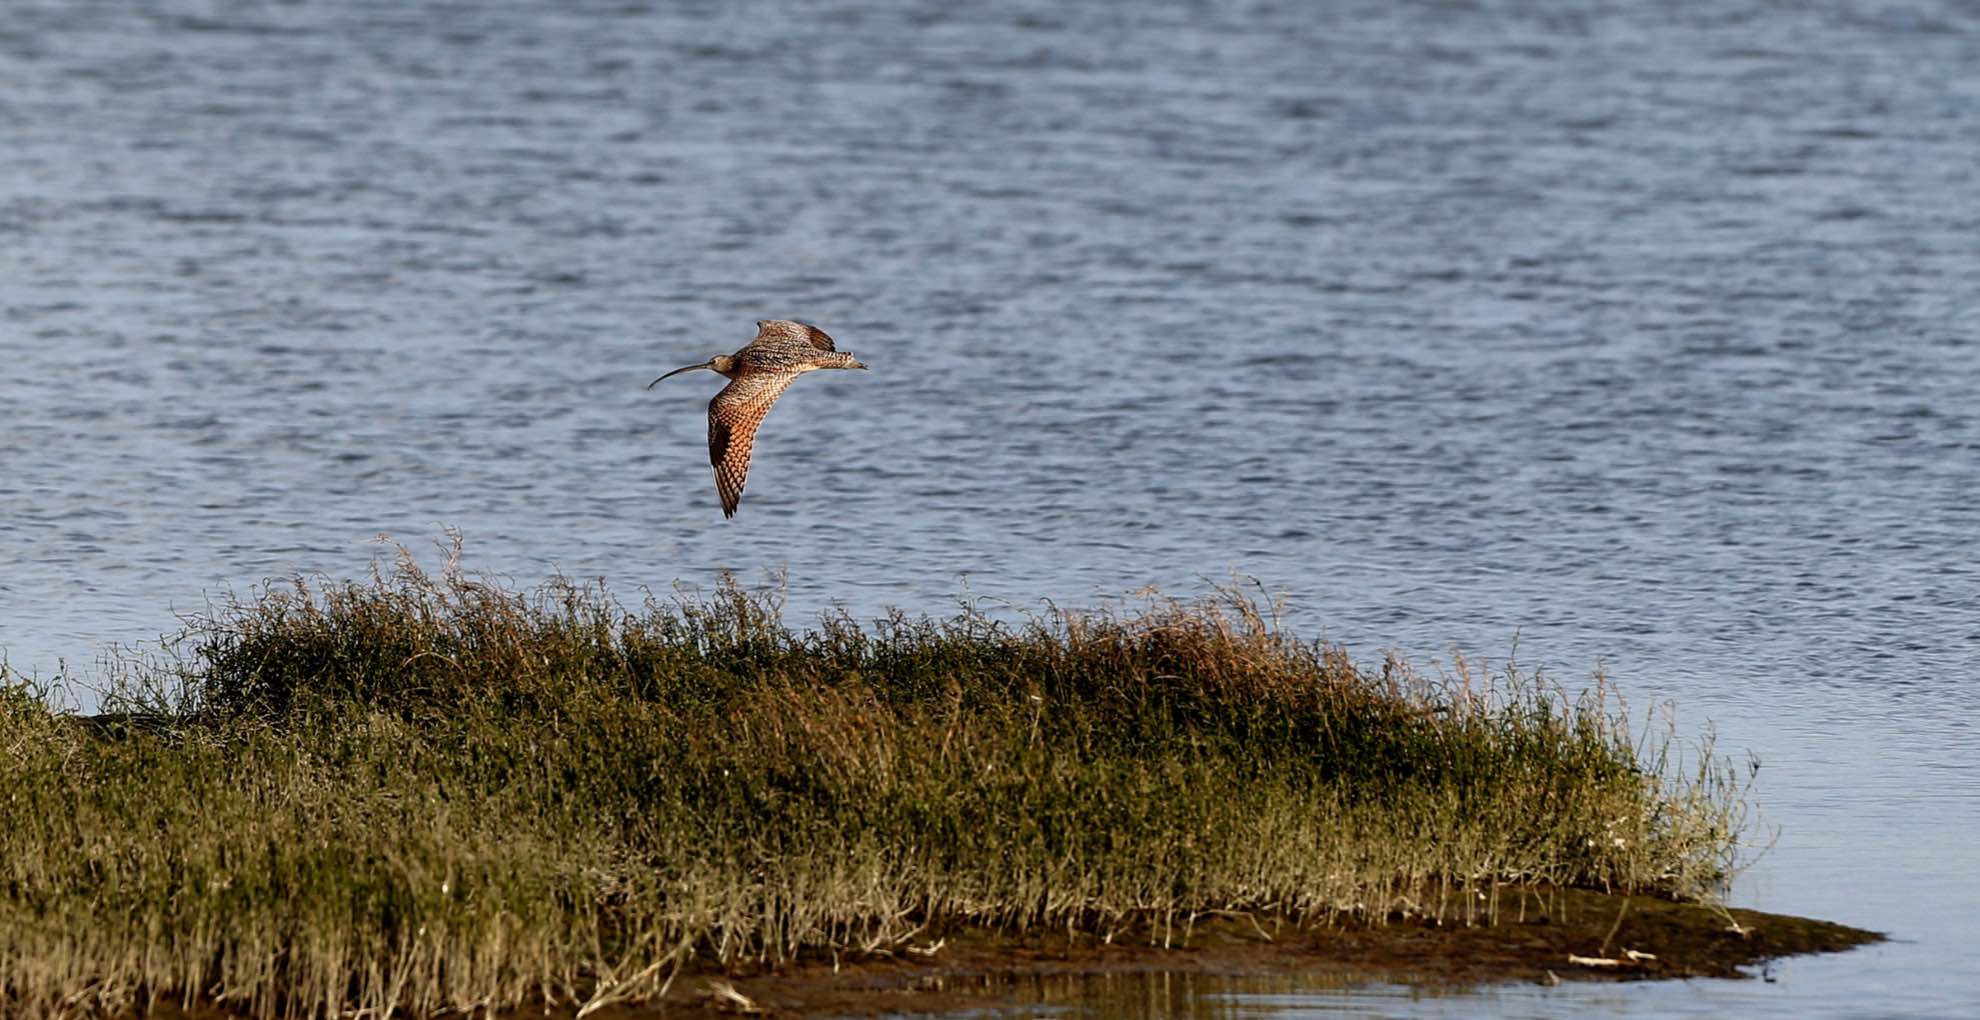 A long-billed curlew flies over restored marshlands at the Eden Landing Ecological Reserve in Hayward, California.